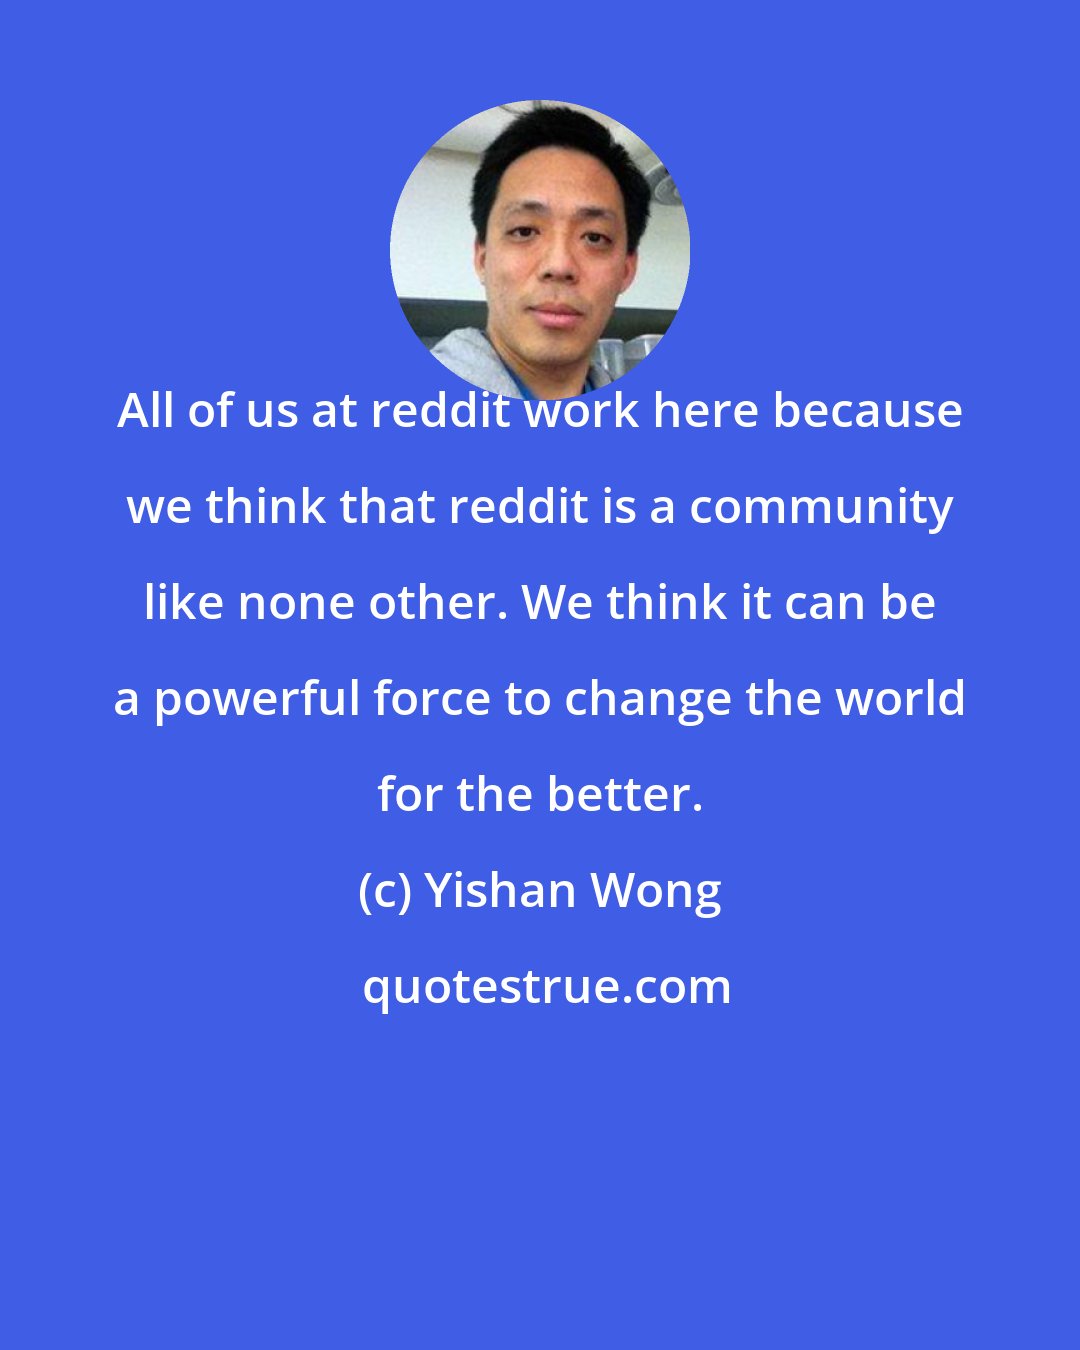 Yishan Wong: All of us at reddit work here because we think that reddit is a community like none other. We think it can be a powerful force to change the world for the better.